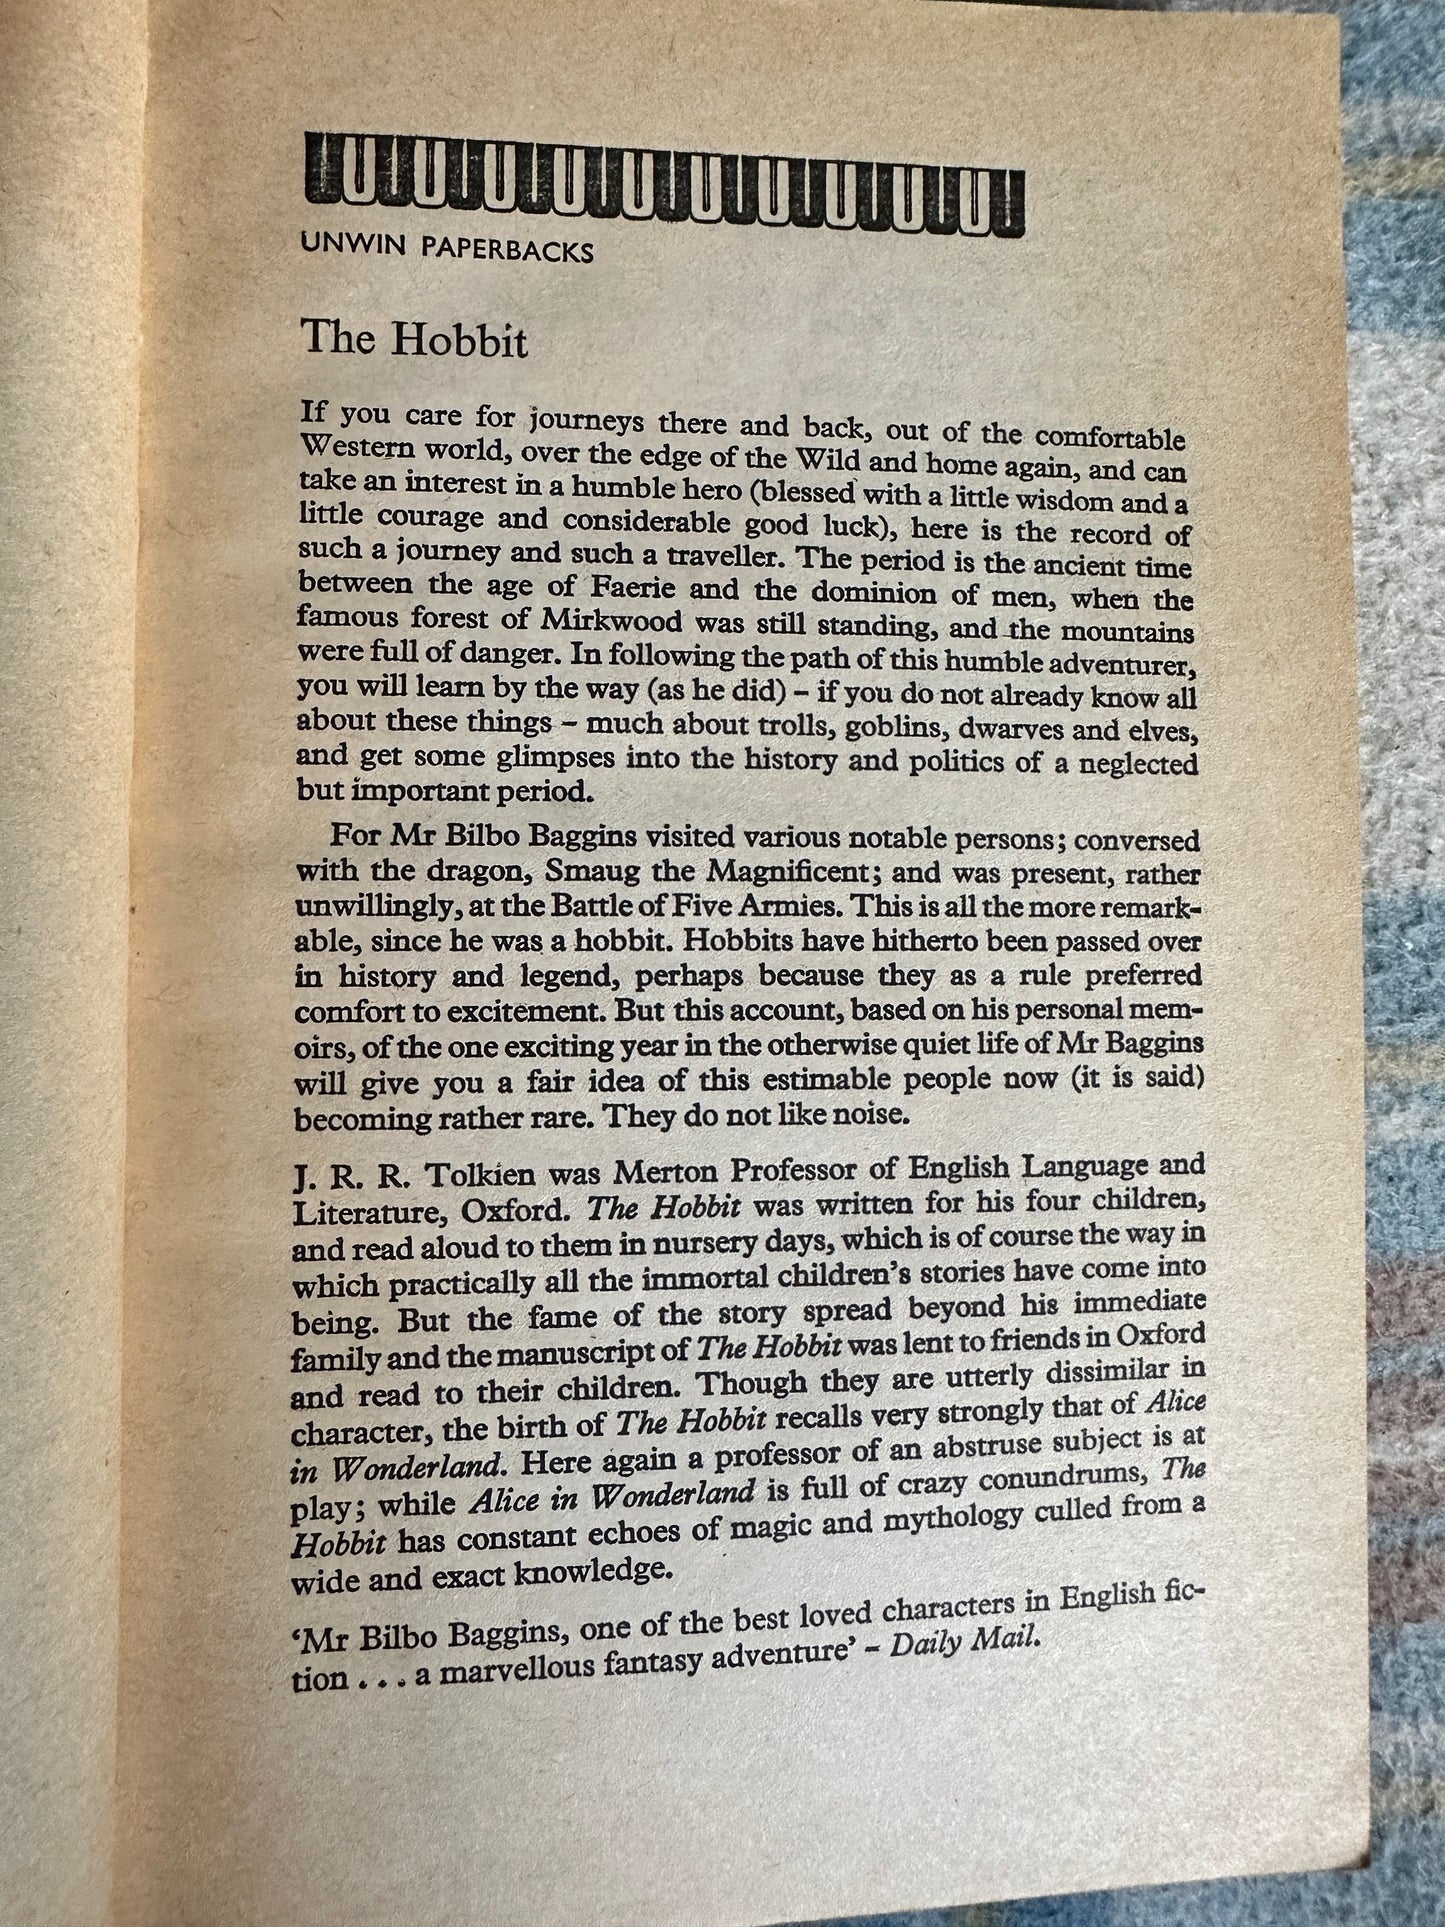 1978 The Hobbit - J. R. R. Tolkien illustrated by author (Unwin Paperbacks)